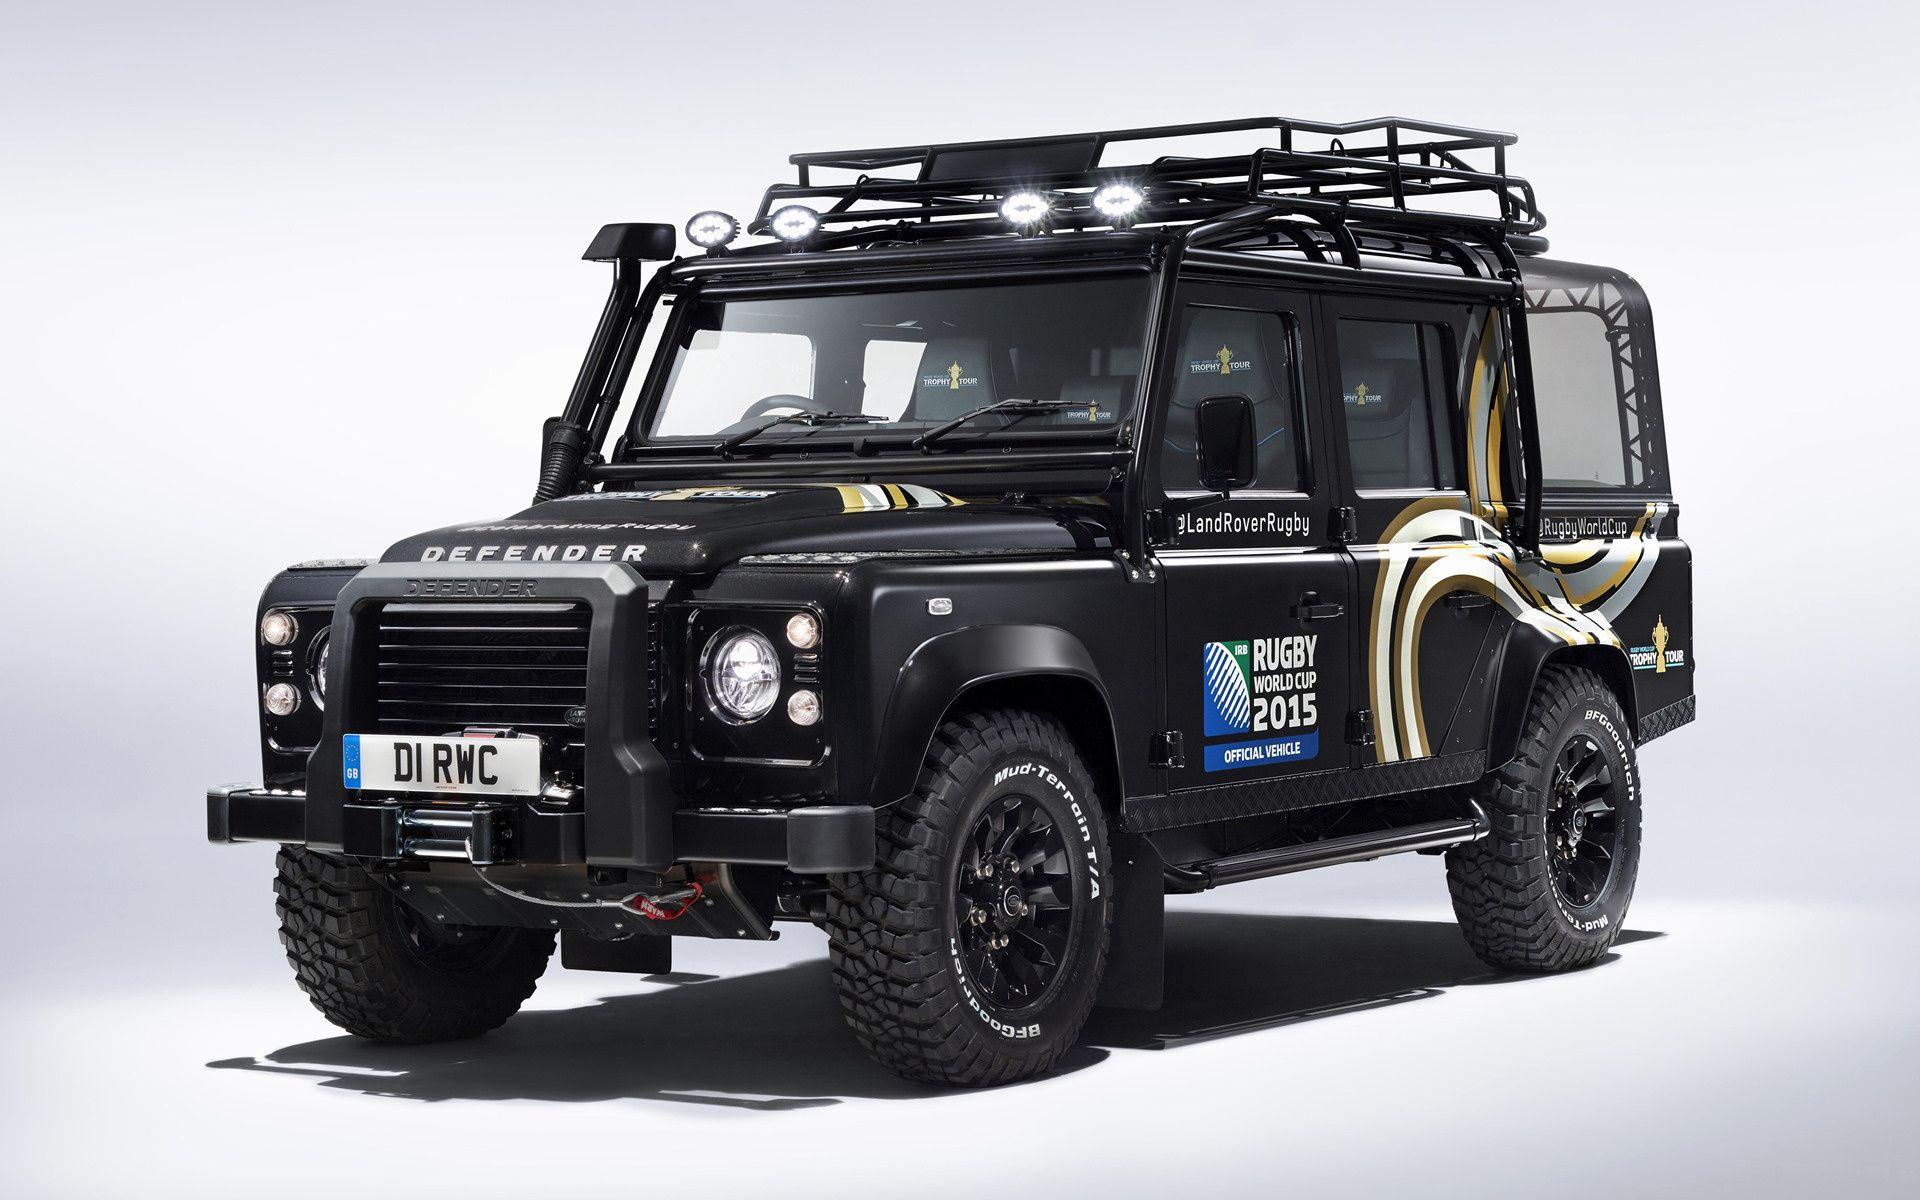 Land Rover Defender Rugby World Cup 2015 (2015) Wallpaper and HD